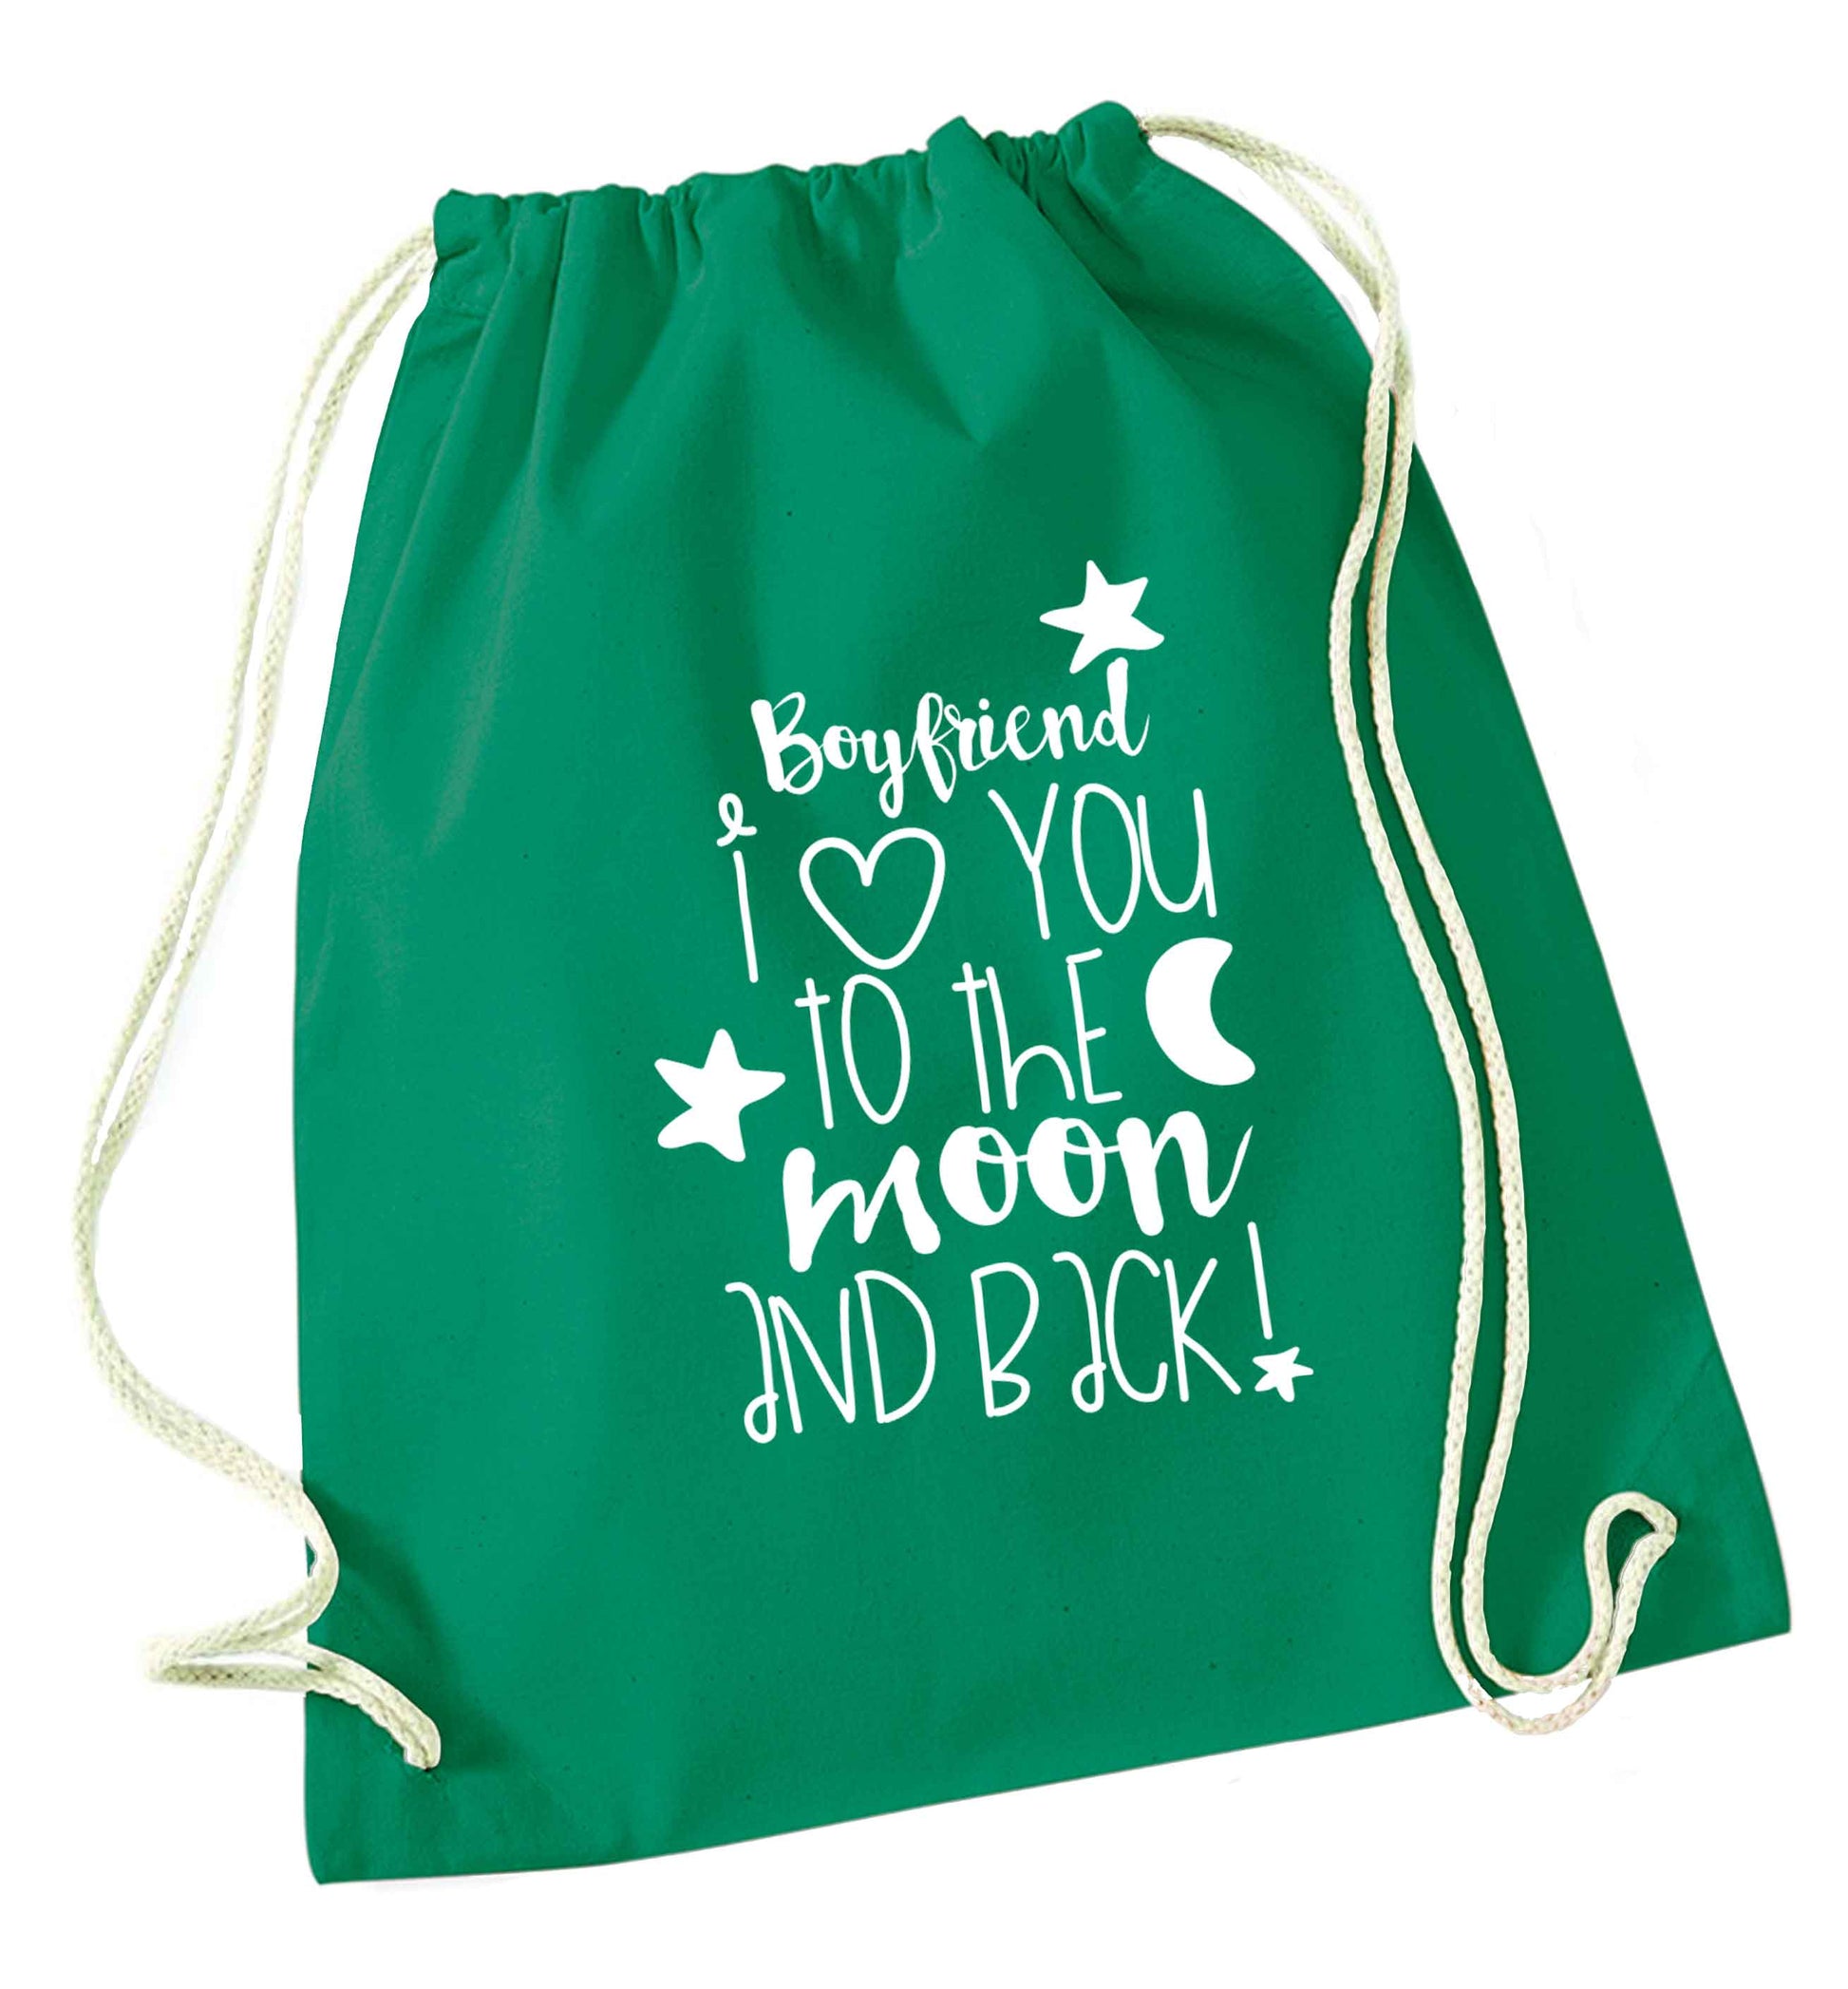 Boyfriend I love you to the moon and back green drawstring bag